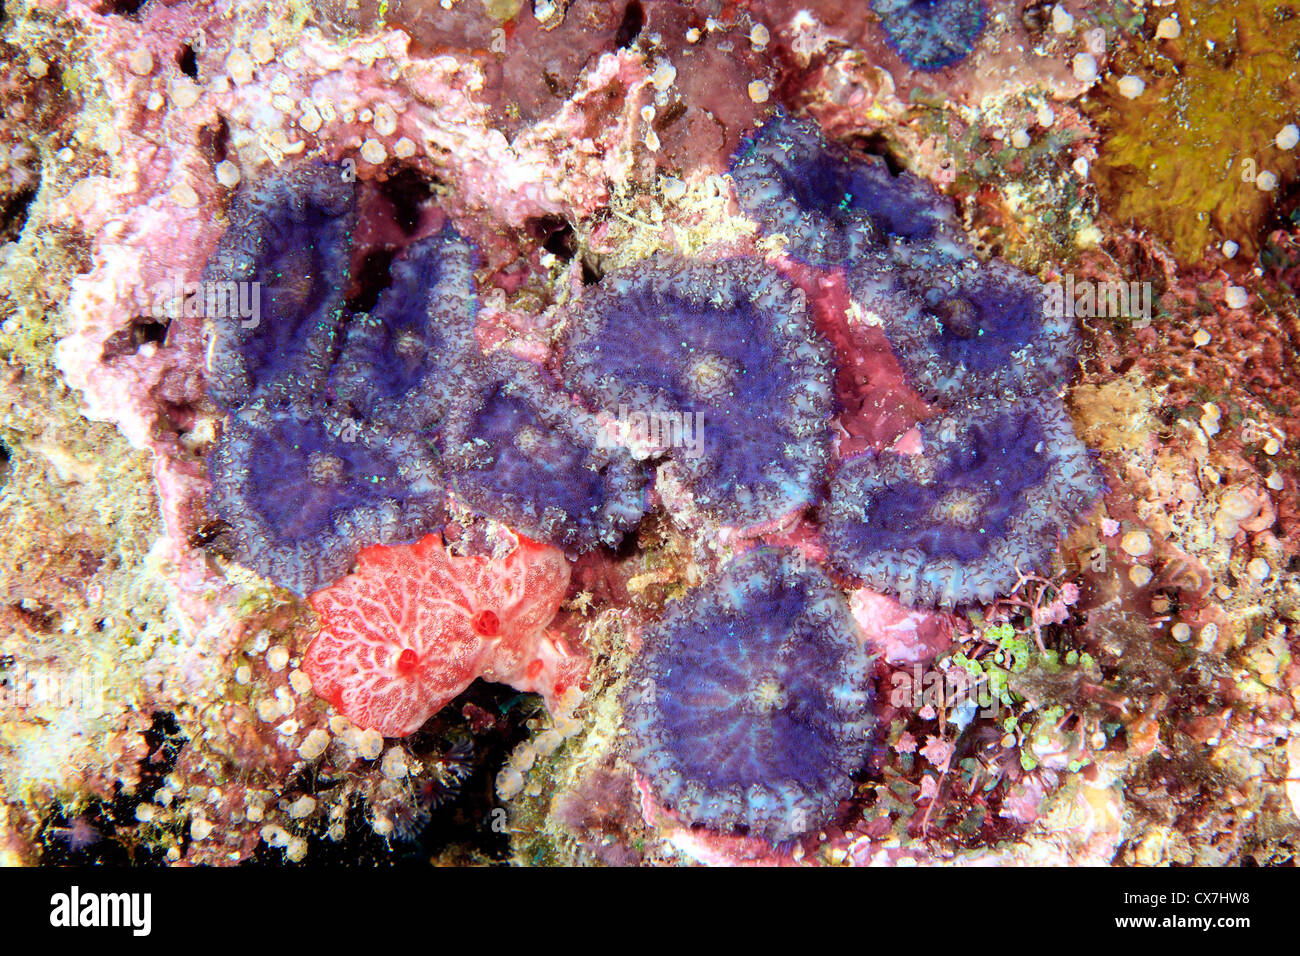 Purple Corallimorpharians, or Corallimorph, Discosoma sp or Actinodiscus sp, on the reef. Stock Photo